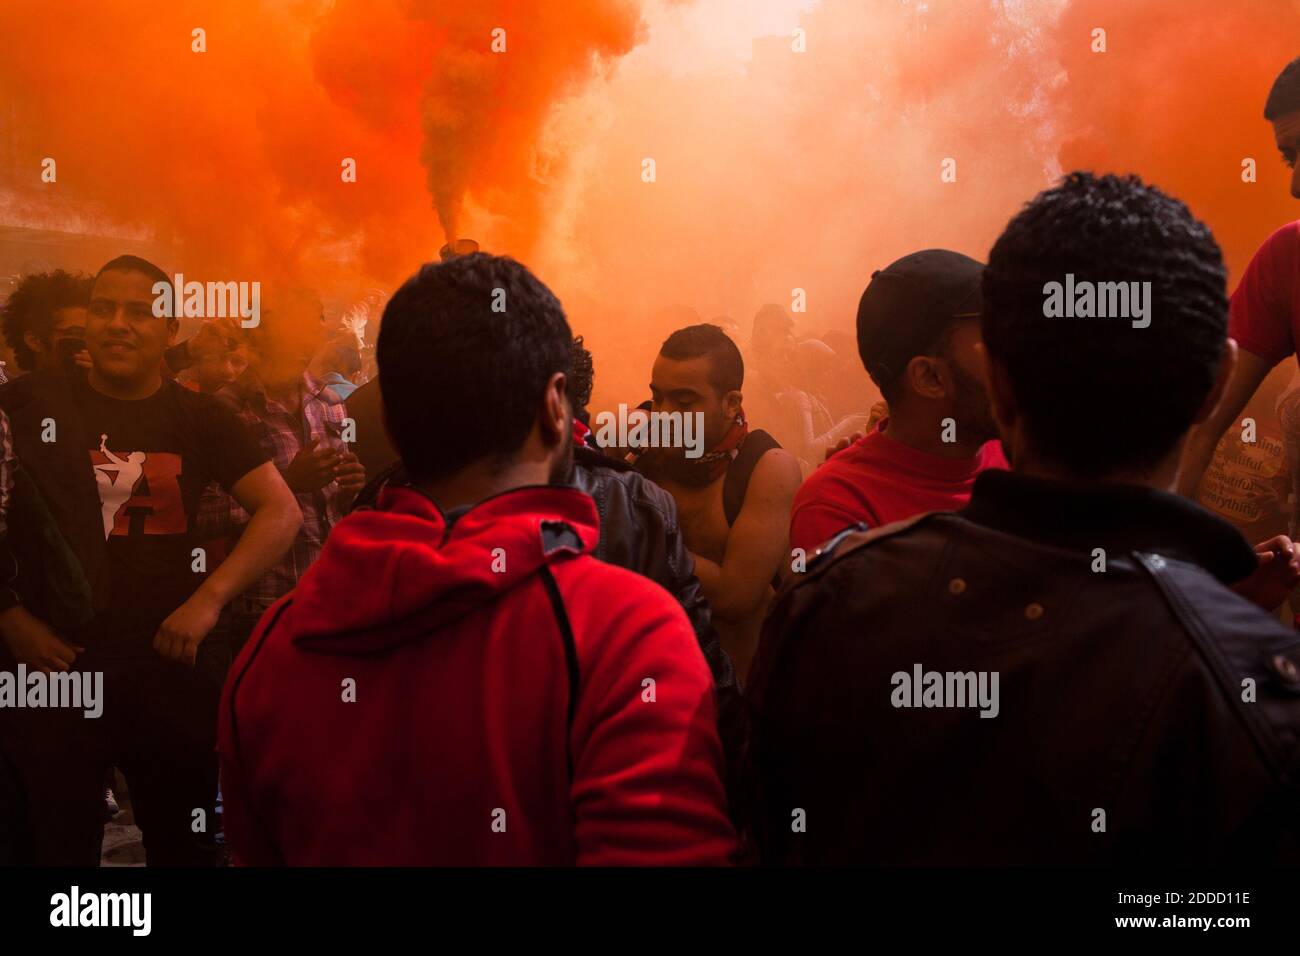 NO FILM, NO VIDEO, NO TV, NO DOCUMENTARY - Clouds of orange smoke fill the  air as thousands of members and supporters of Cairo, Egypt's football club  Ultras Al-Ahly celebrate on Saturday,